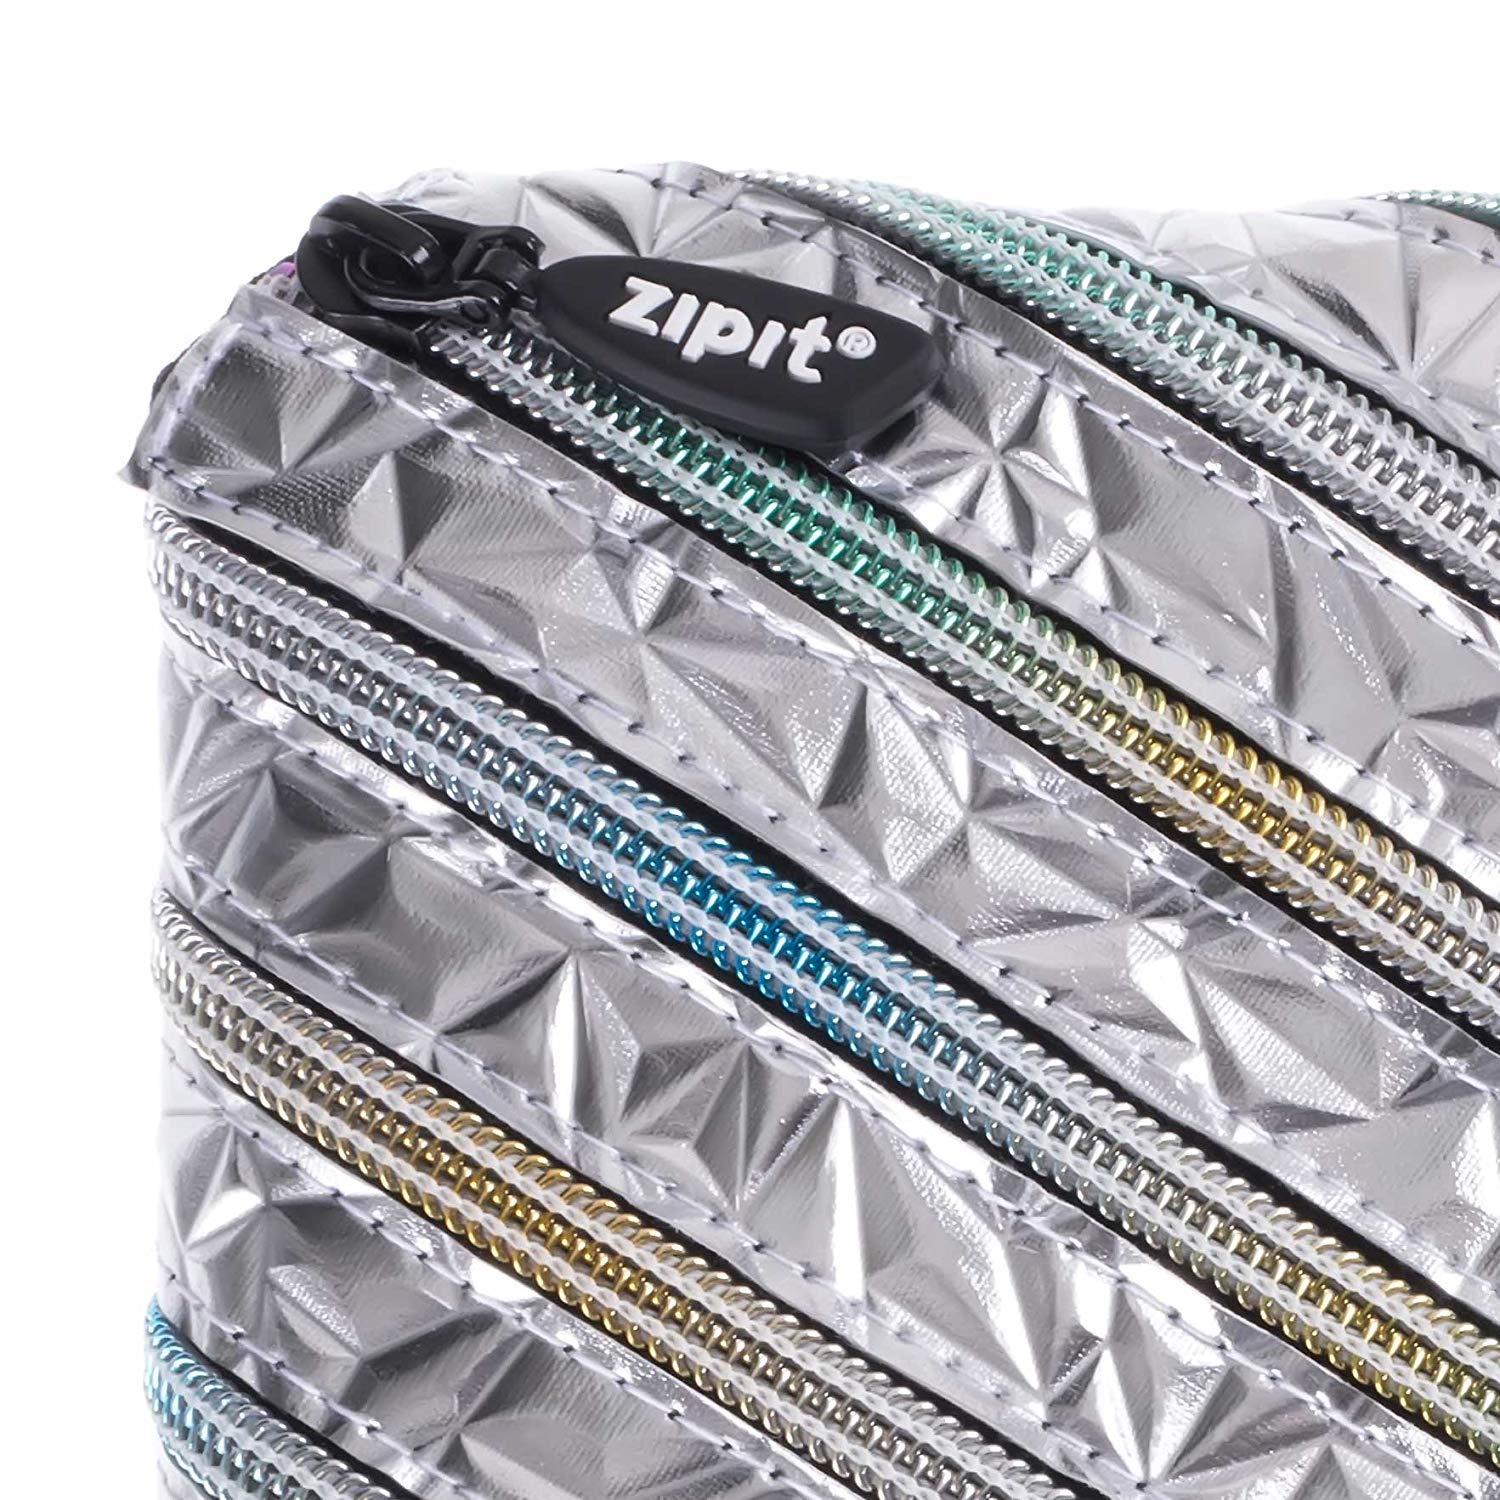 ZIPIT Metallic Pencil Case for Girls | Pencil Pouch for School, College and Office | Pencil Bag for Kids (Silver)